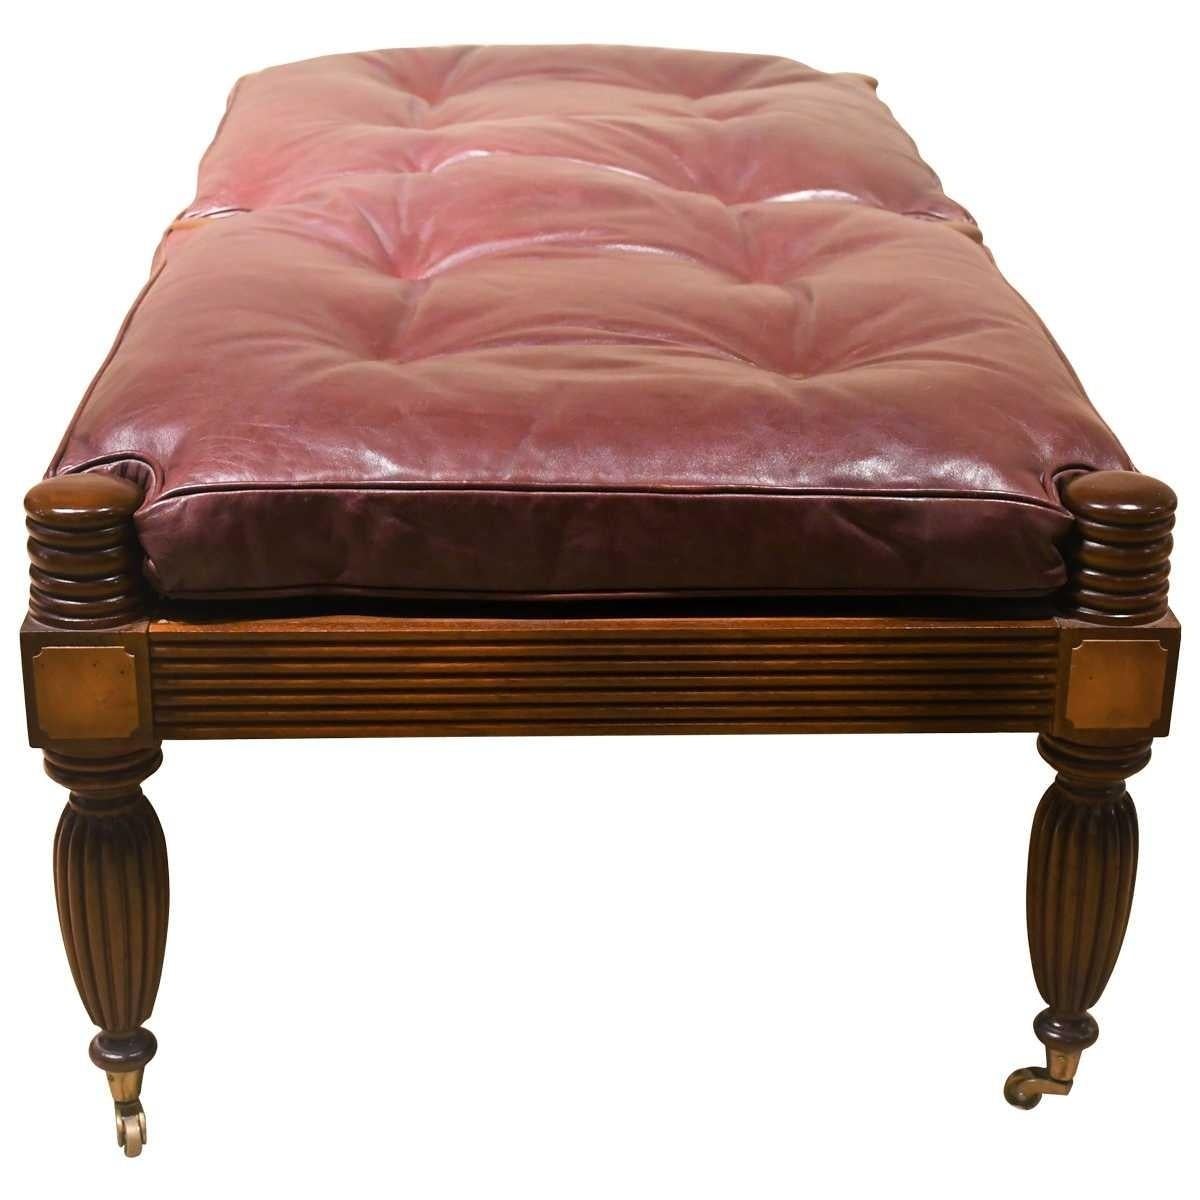 18th Century Attractive Regency Style Mahogany Bench with Button Tufted Leather Squab